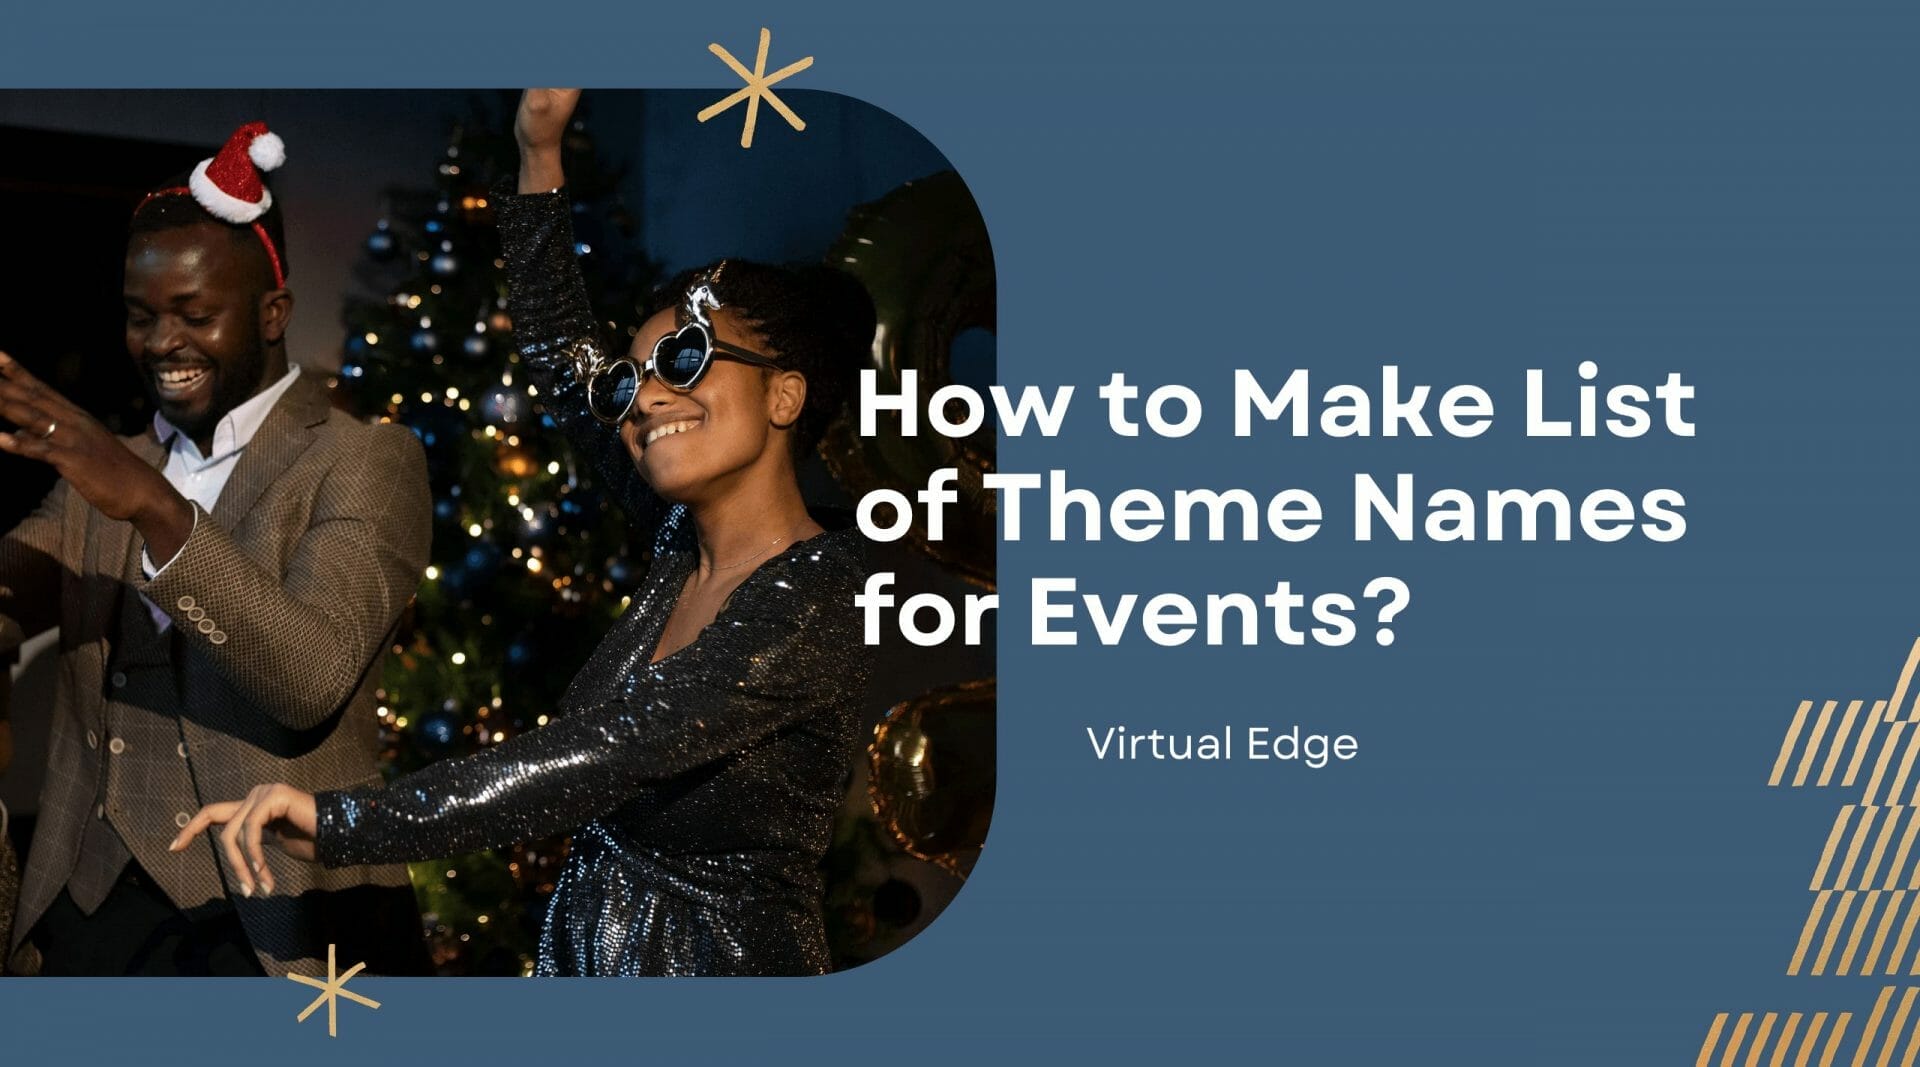 How to Make List of Theme Names for Events?